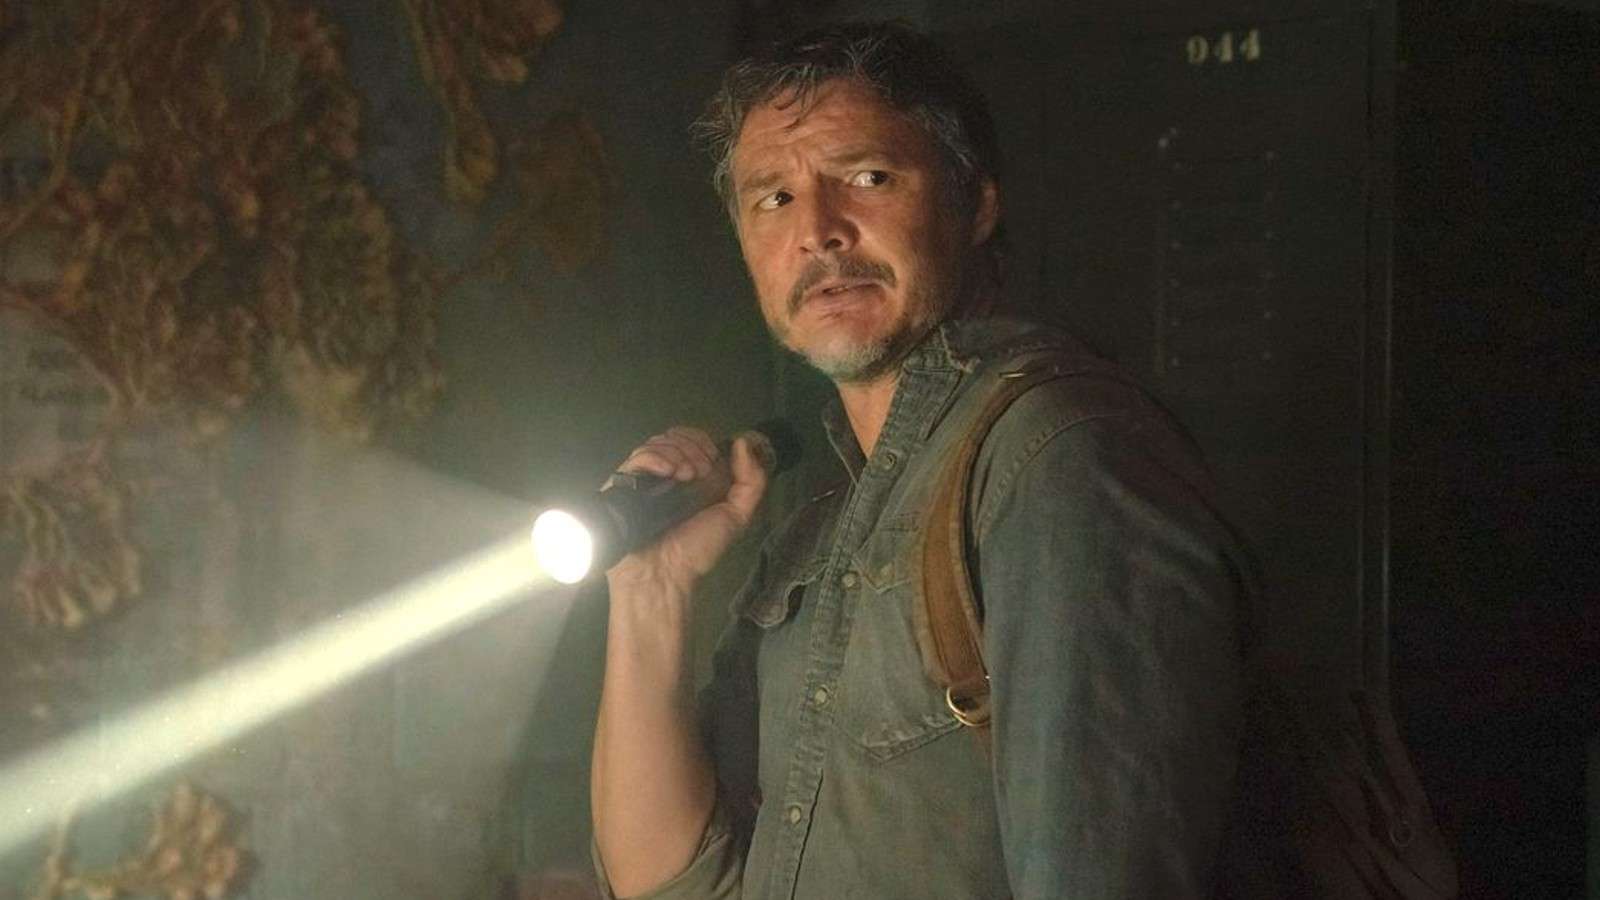 Pedro Pascal as Joel in Episode 1 of The Last of Us HBO series